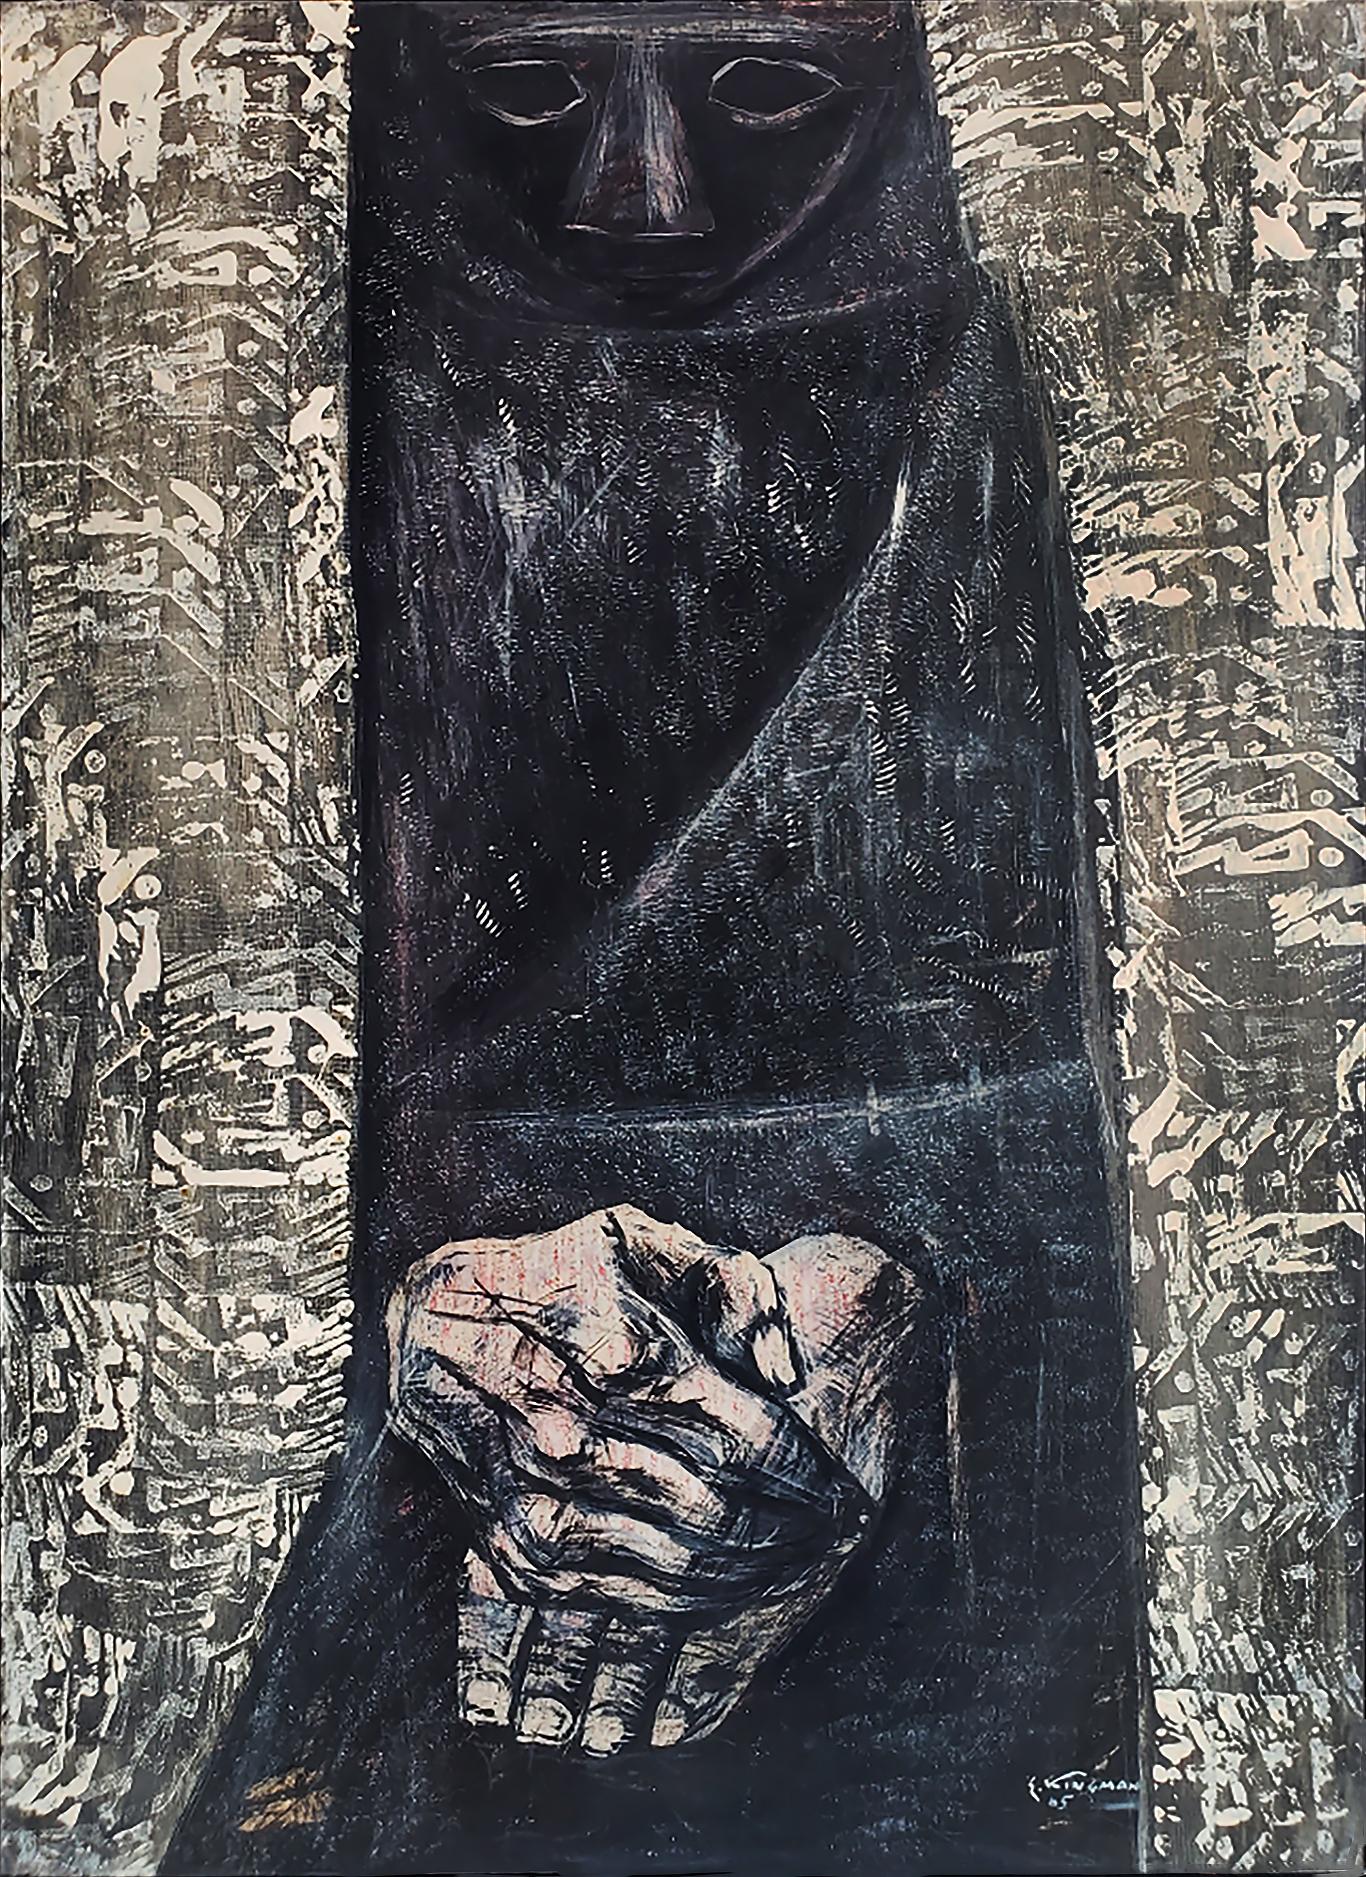 Eduardo Kingman Figurative Painting – Untitled - Mysterious Figure in Black Pancho and Expressive Hands